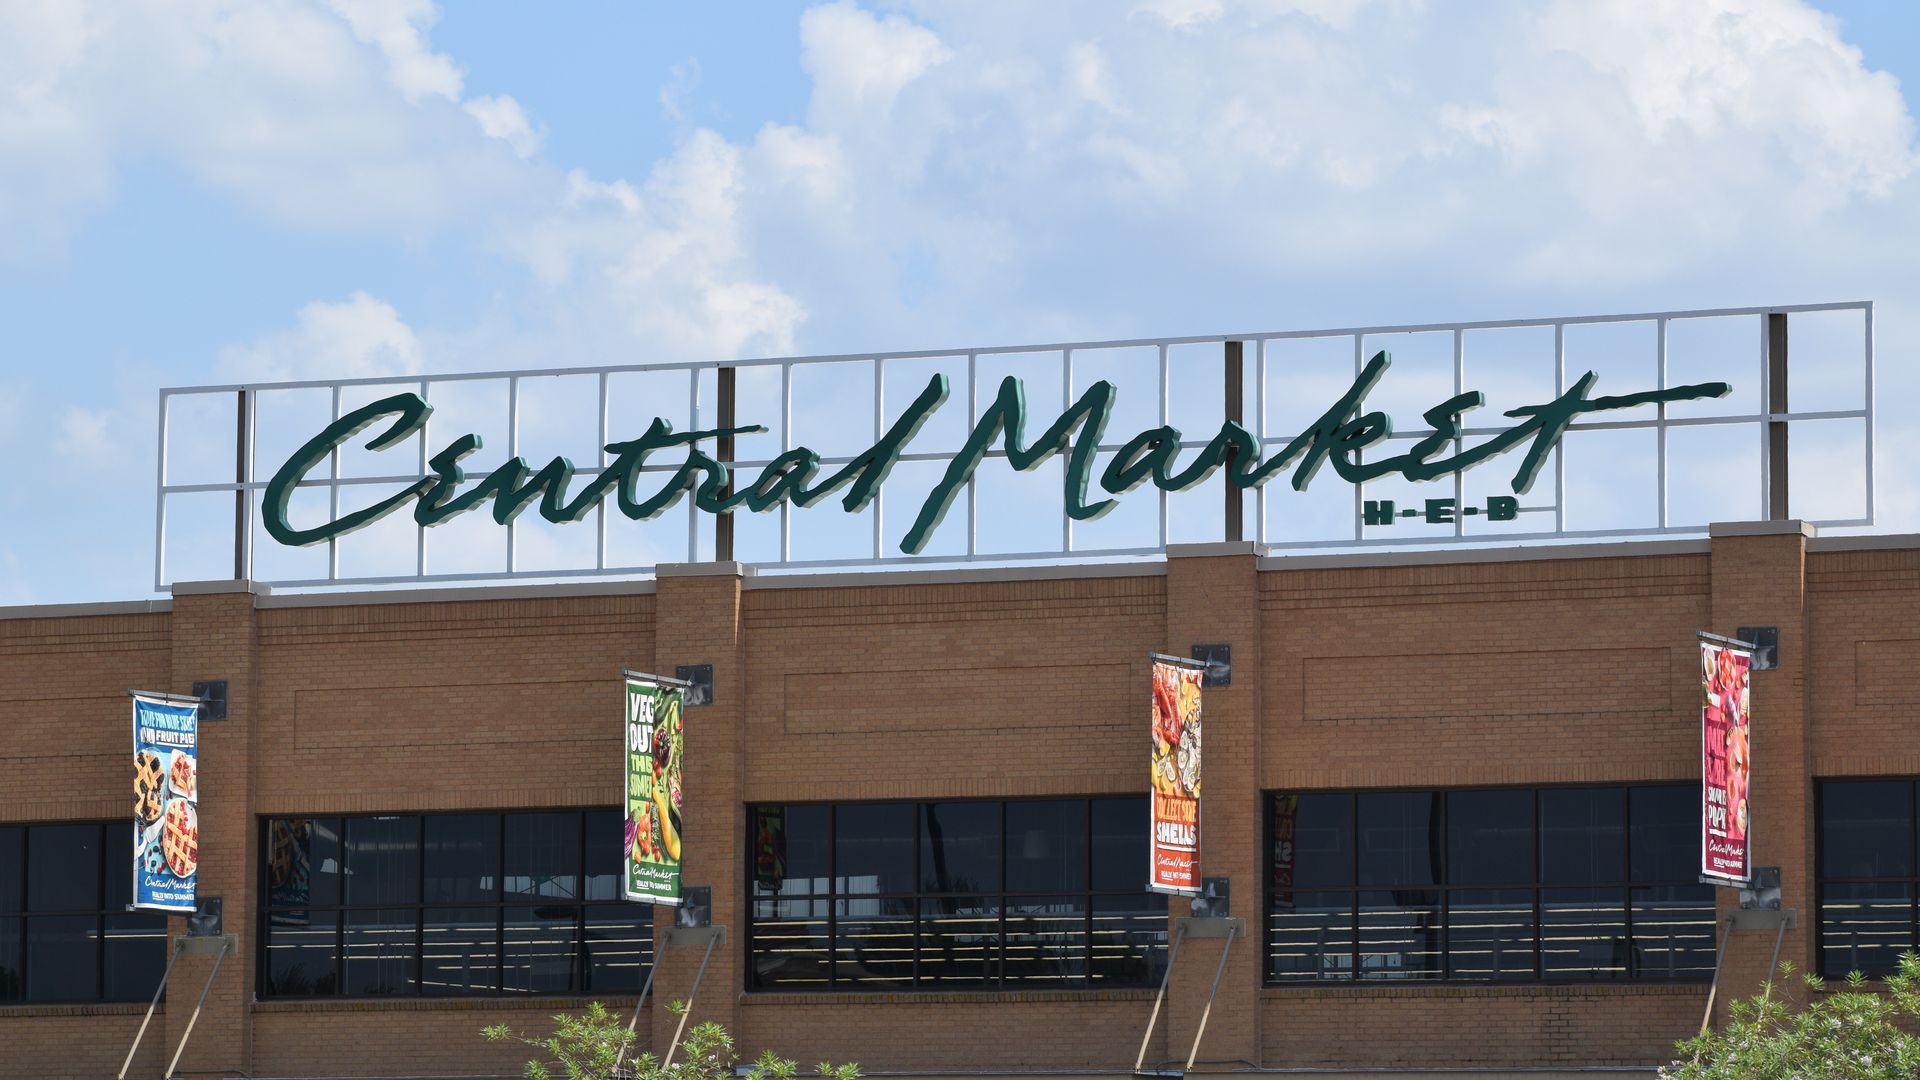 A Central Market grocery store sign against a blue sky with clouds.